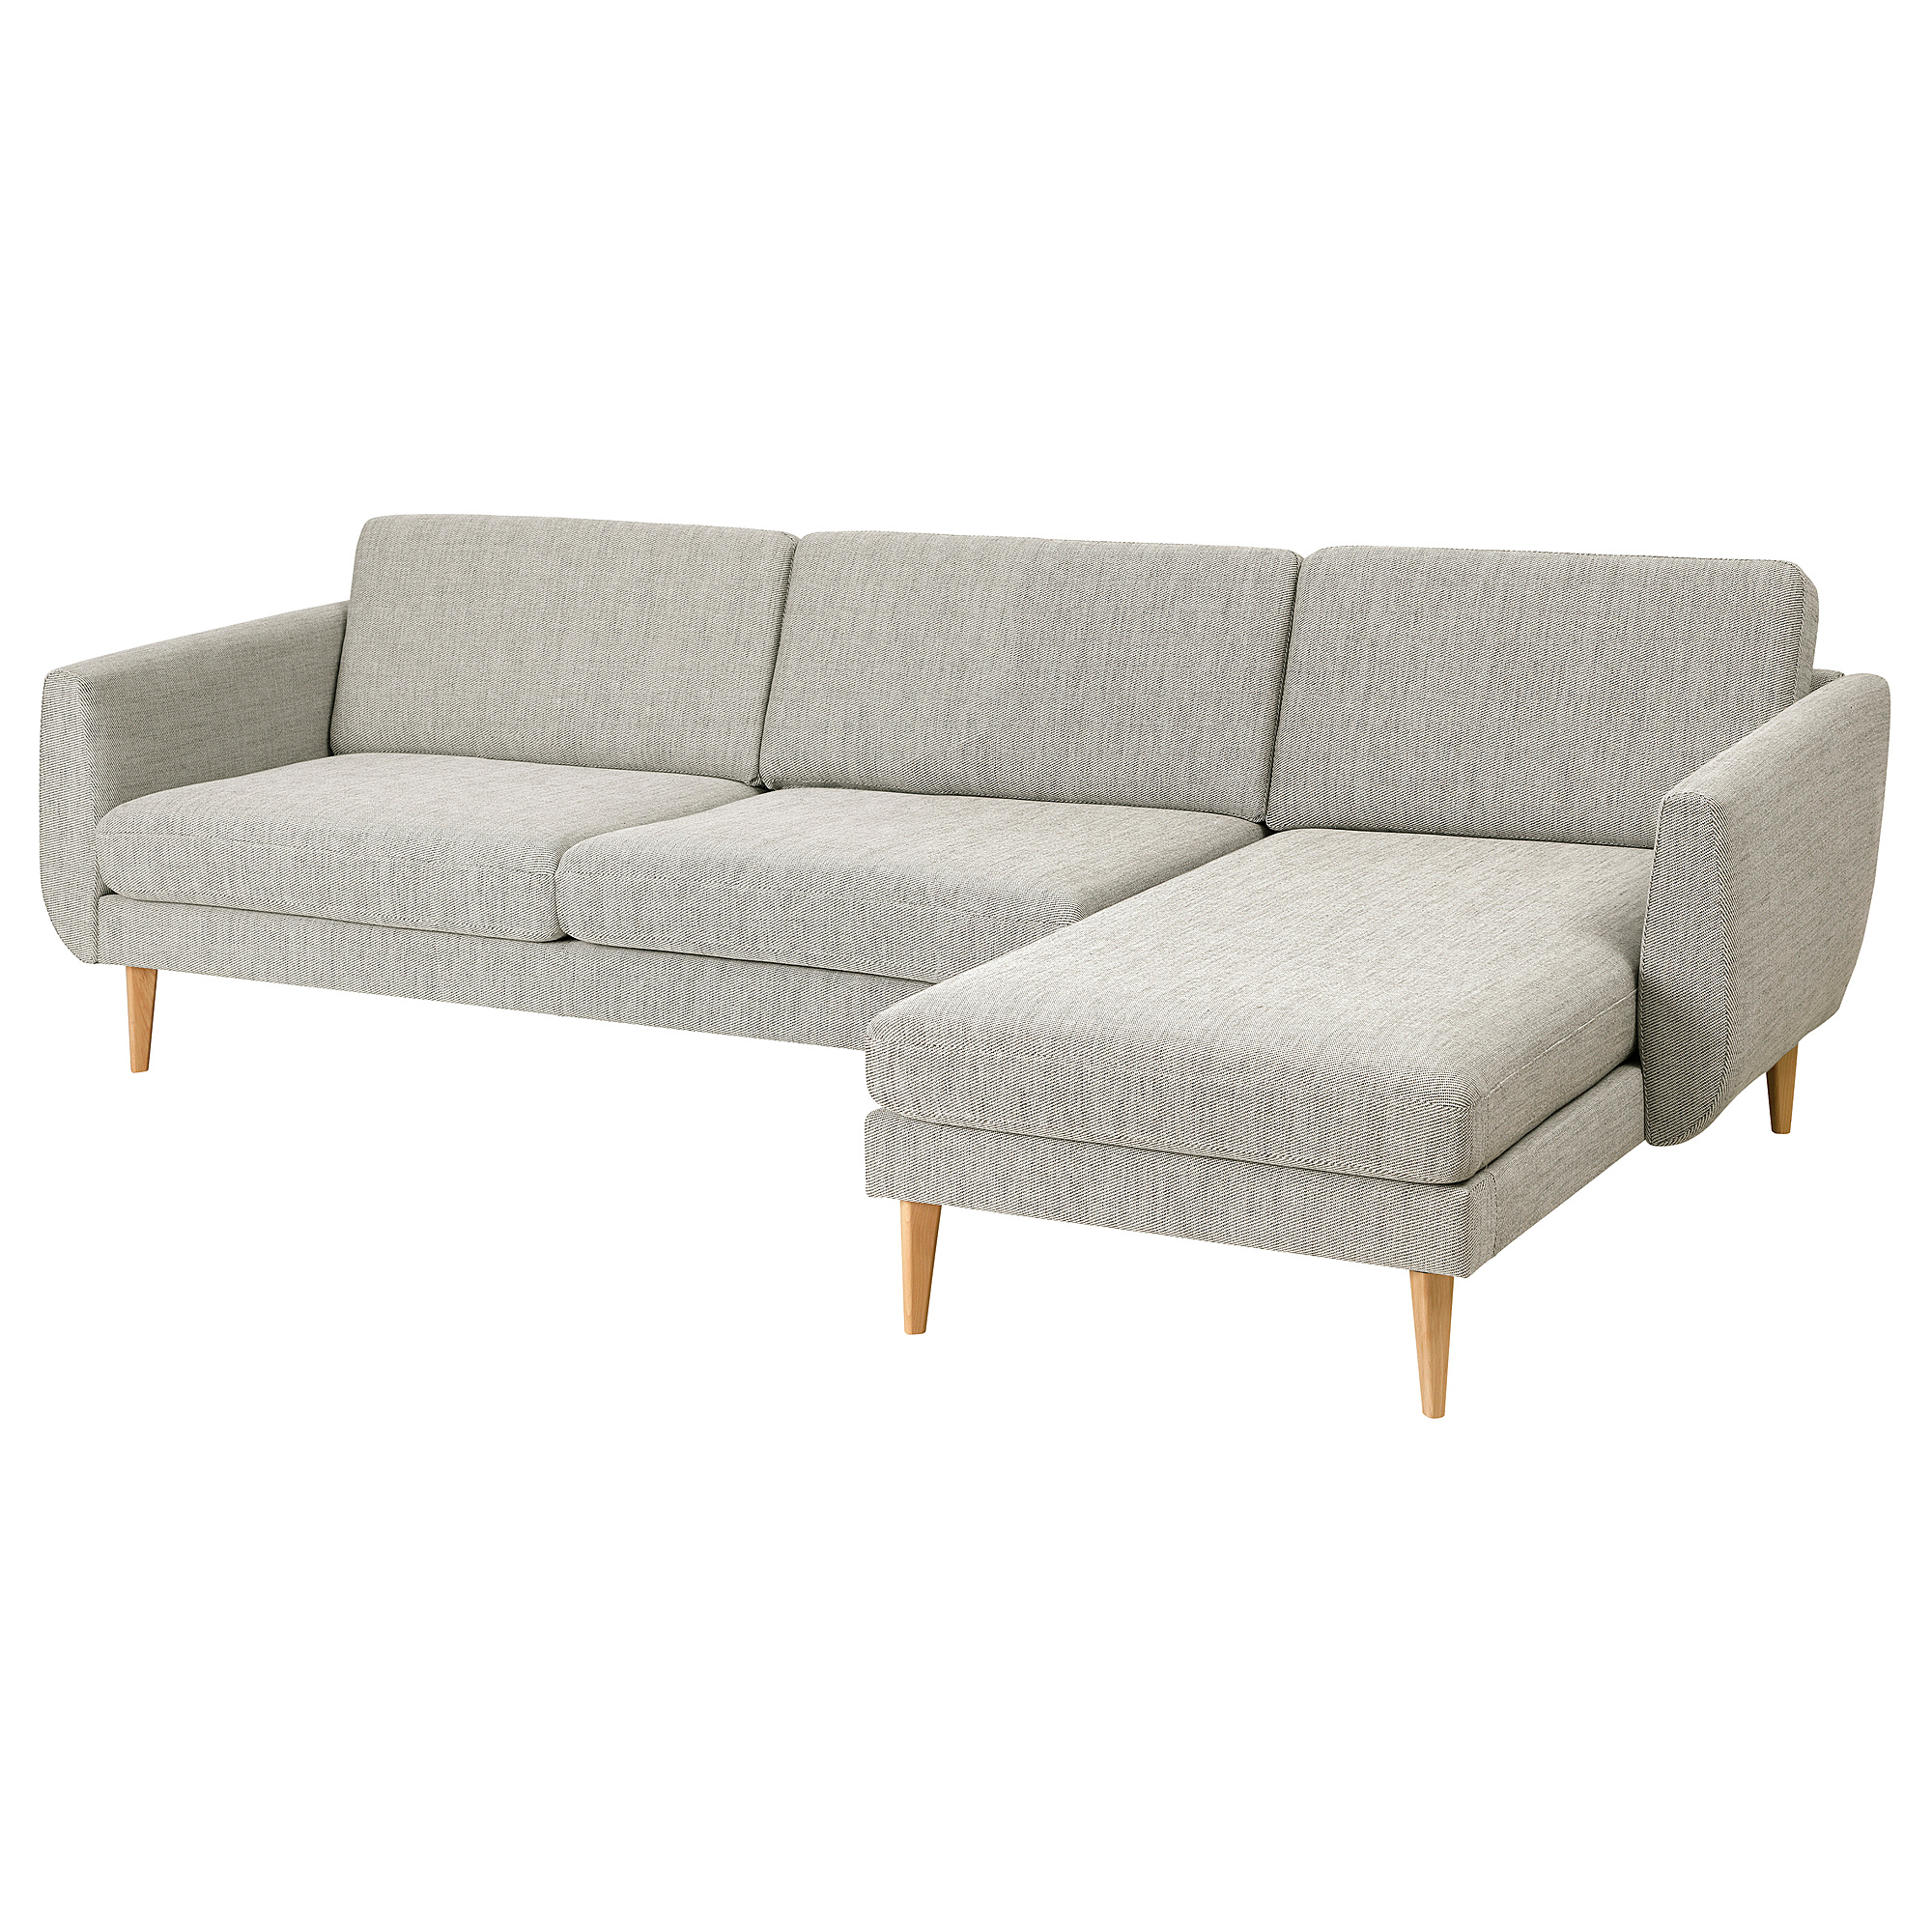 SMEDSTORP 4-seat sofa with chaise longue